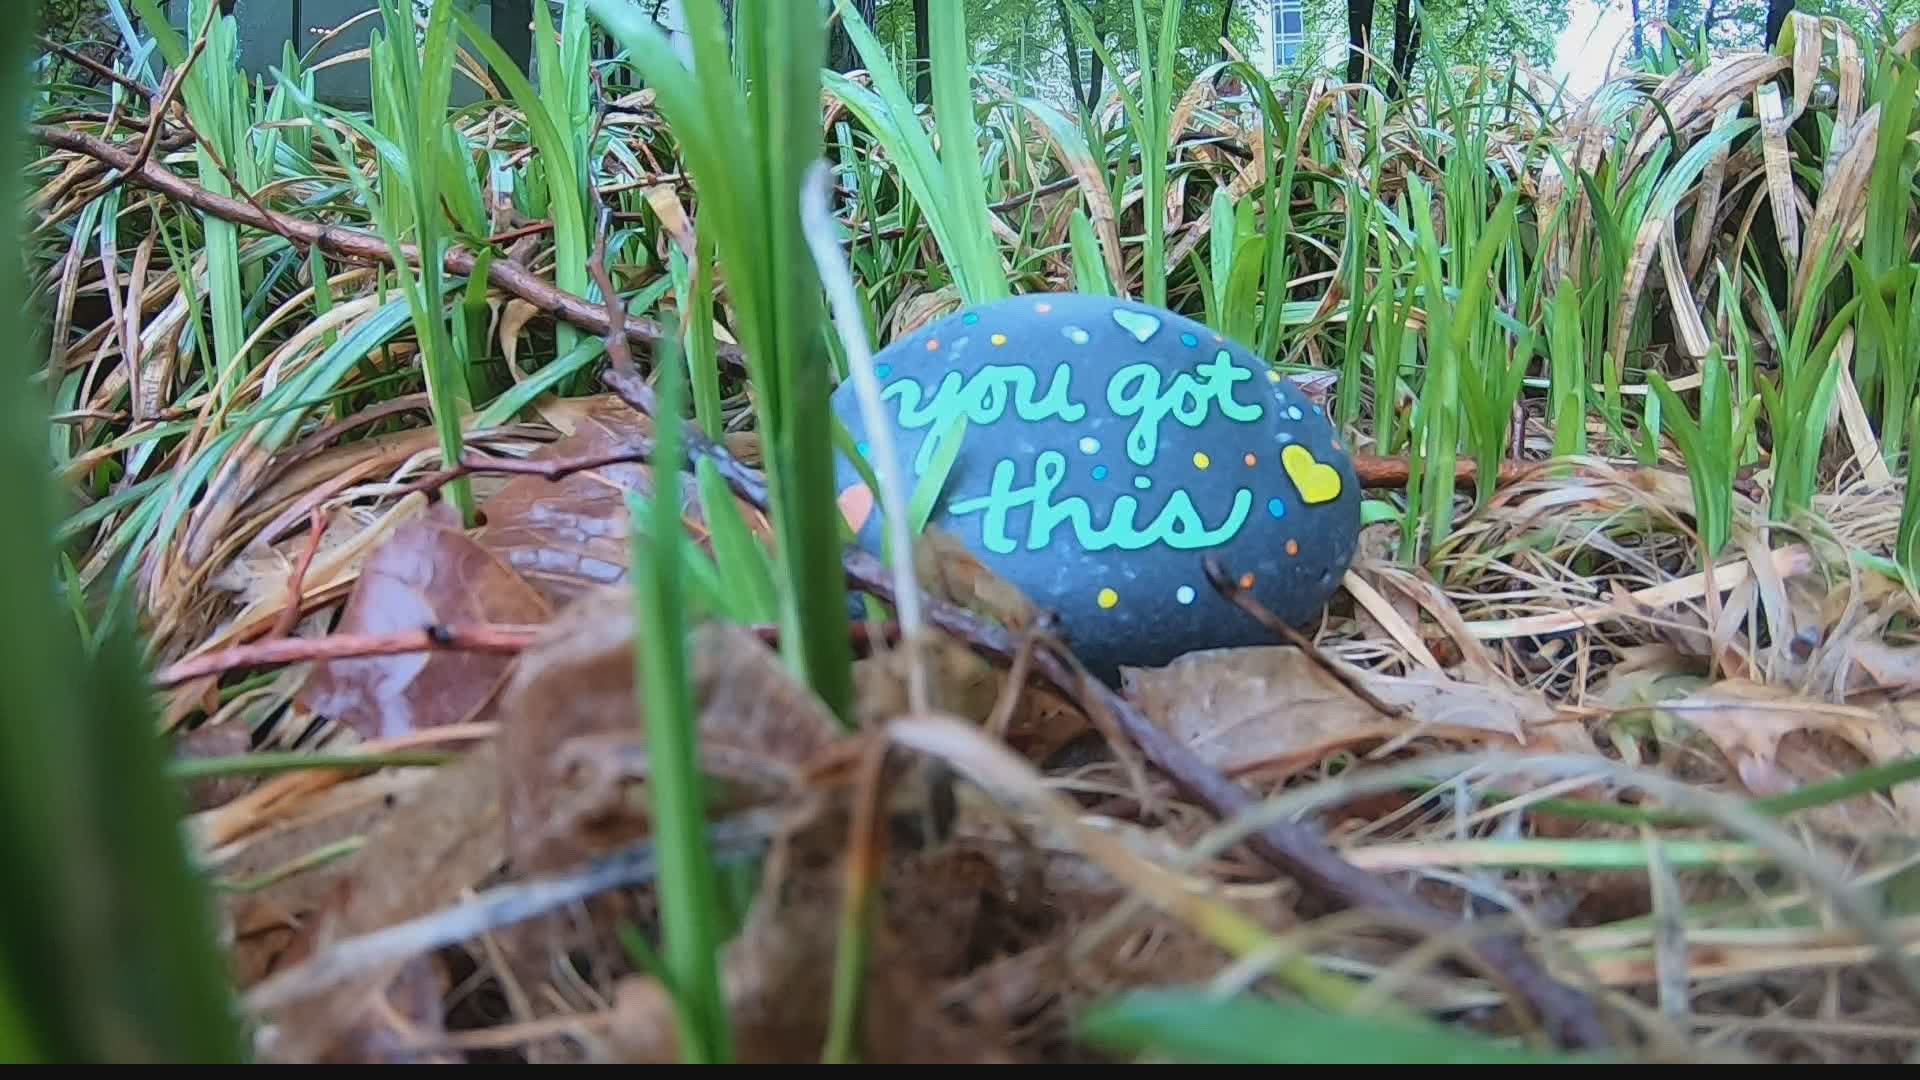 Woman paints rocks with positive messages on them